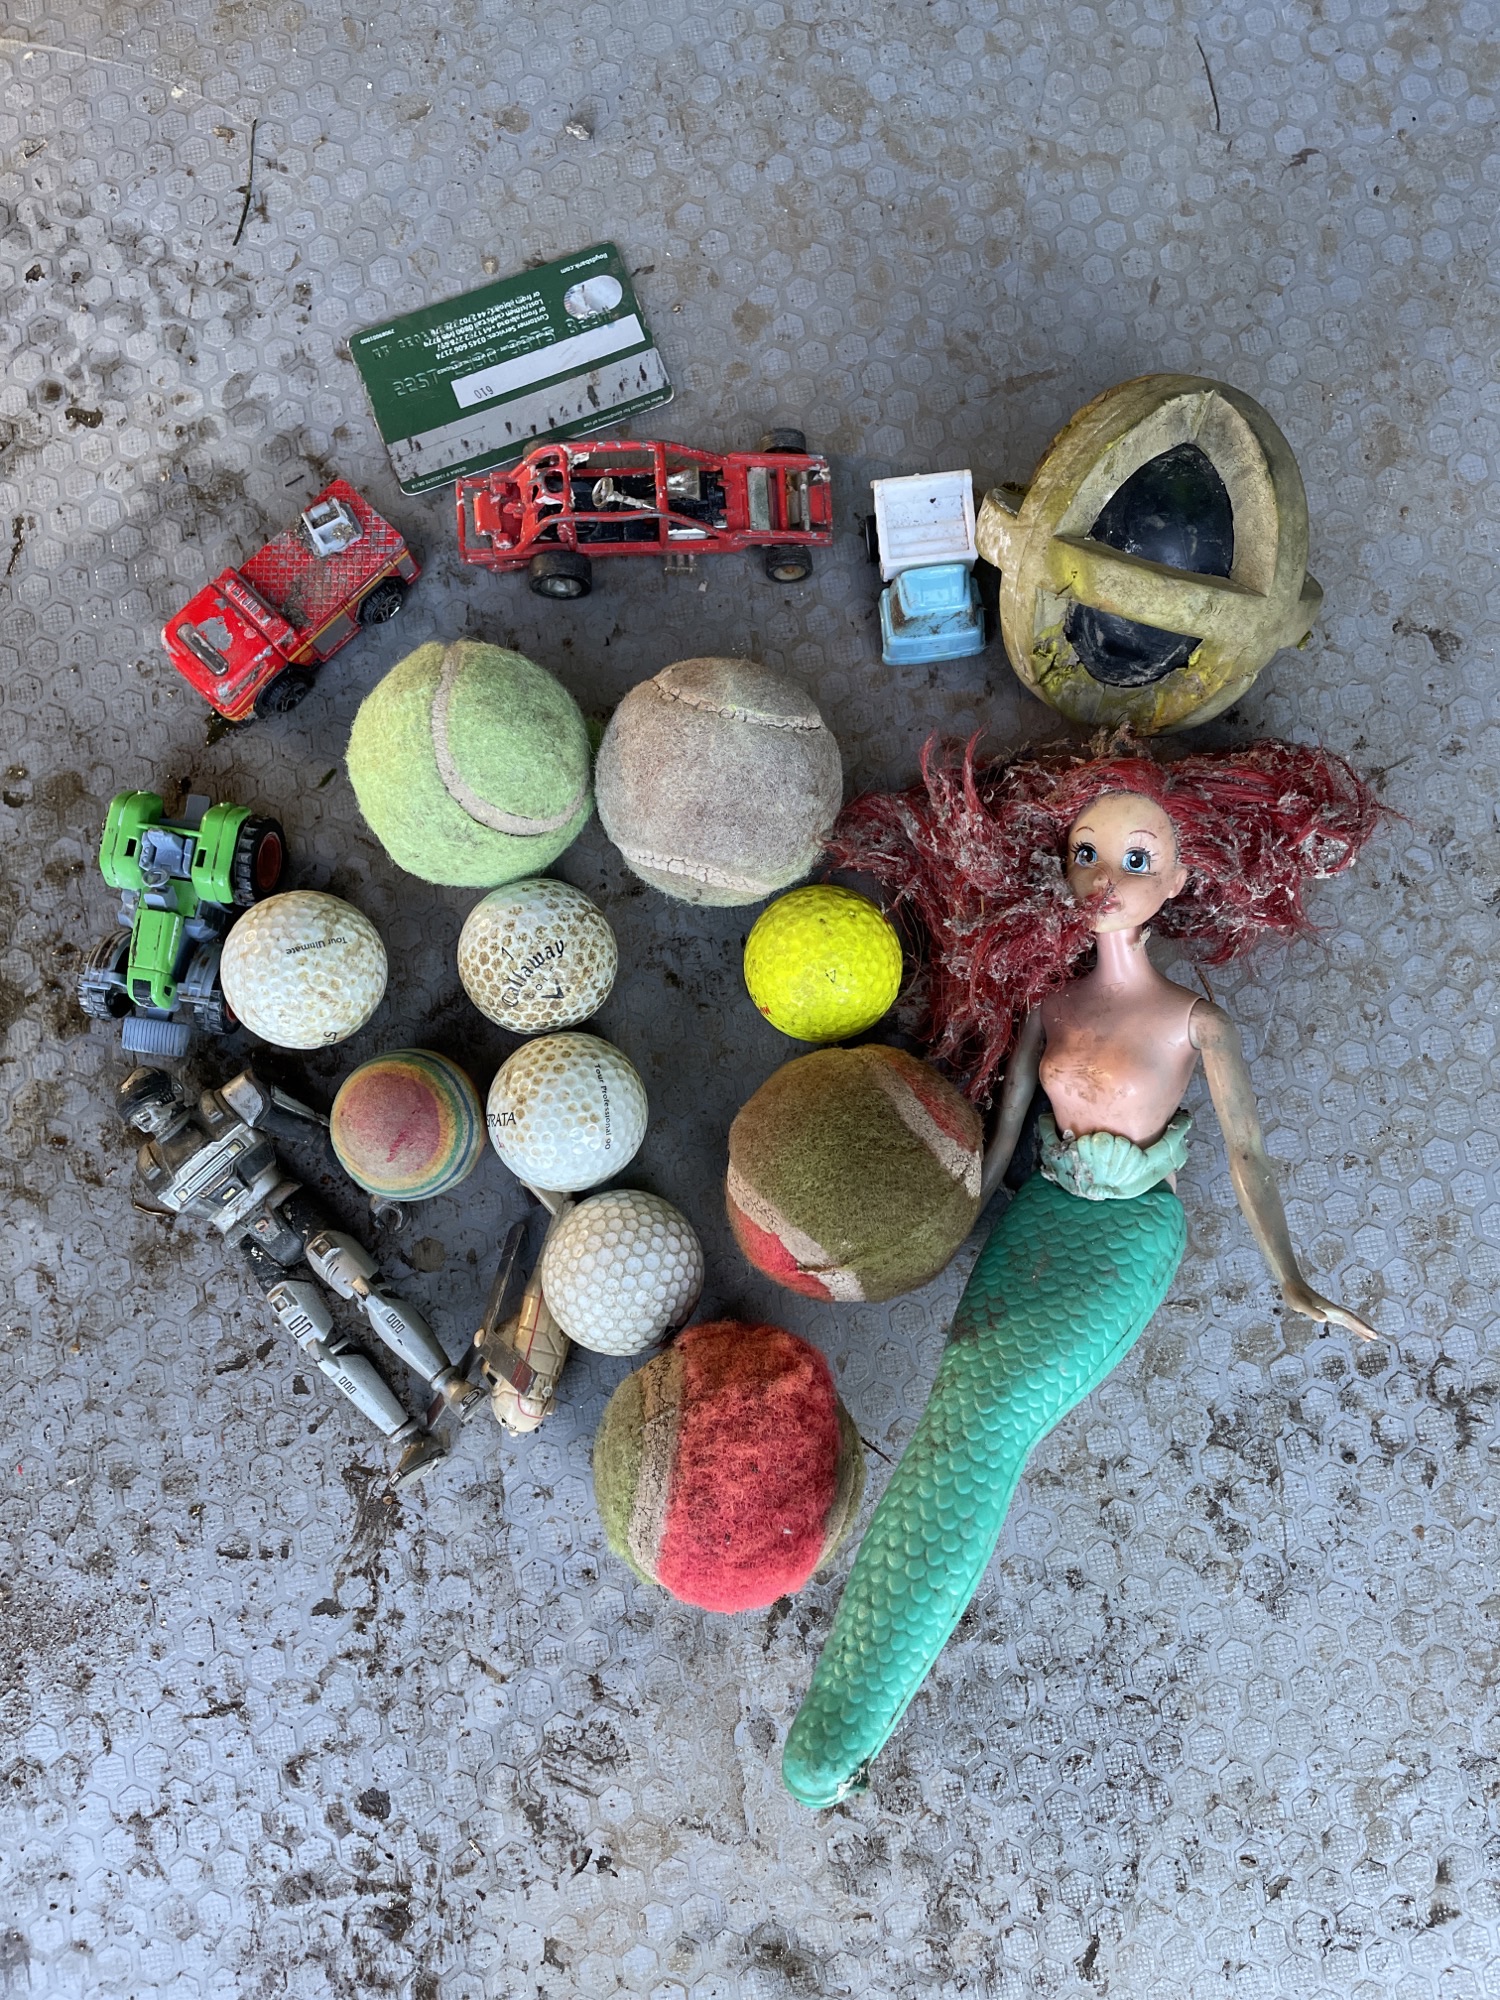 Golf balls, tennis balls, a mermaid doll, toy cars and a bank card among the objects removed from sewers